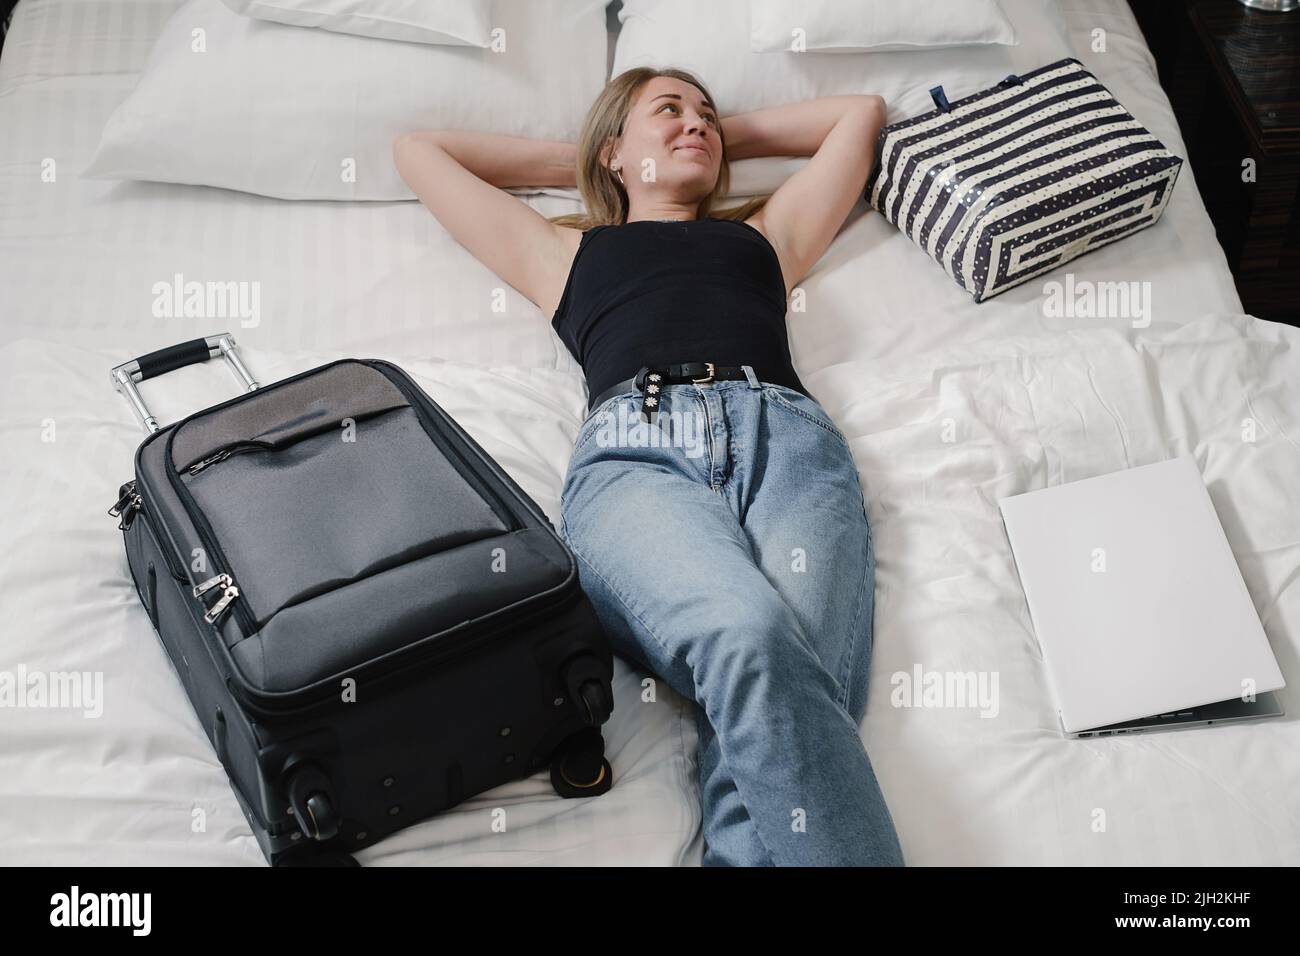 Woman with suitcase on bed in hotel having rest while traveling. Relaxed happy Traveler with bags in hostel Top view. Enjoying trip booking apartments Stock Photo